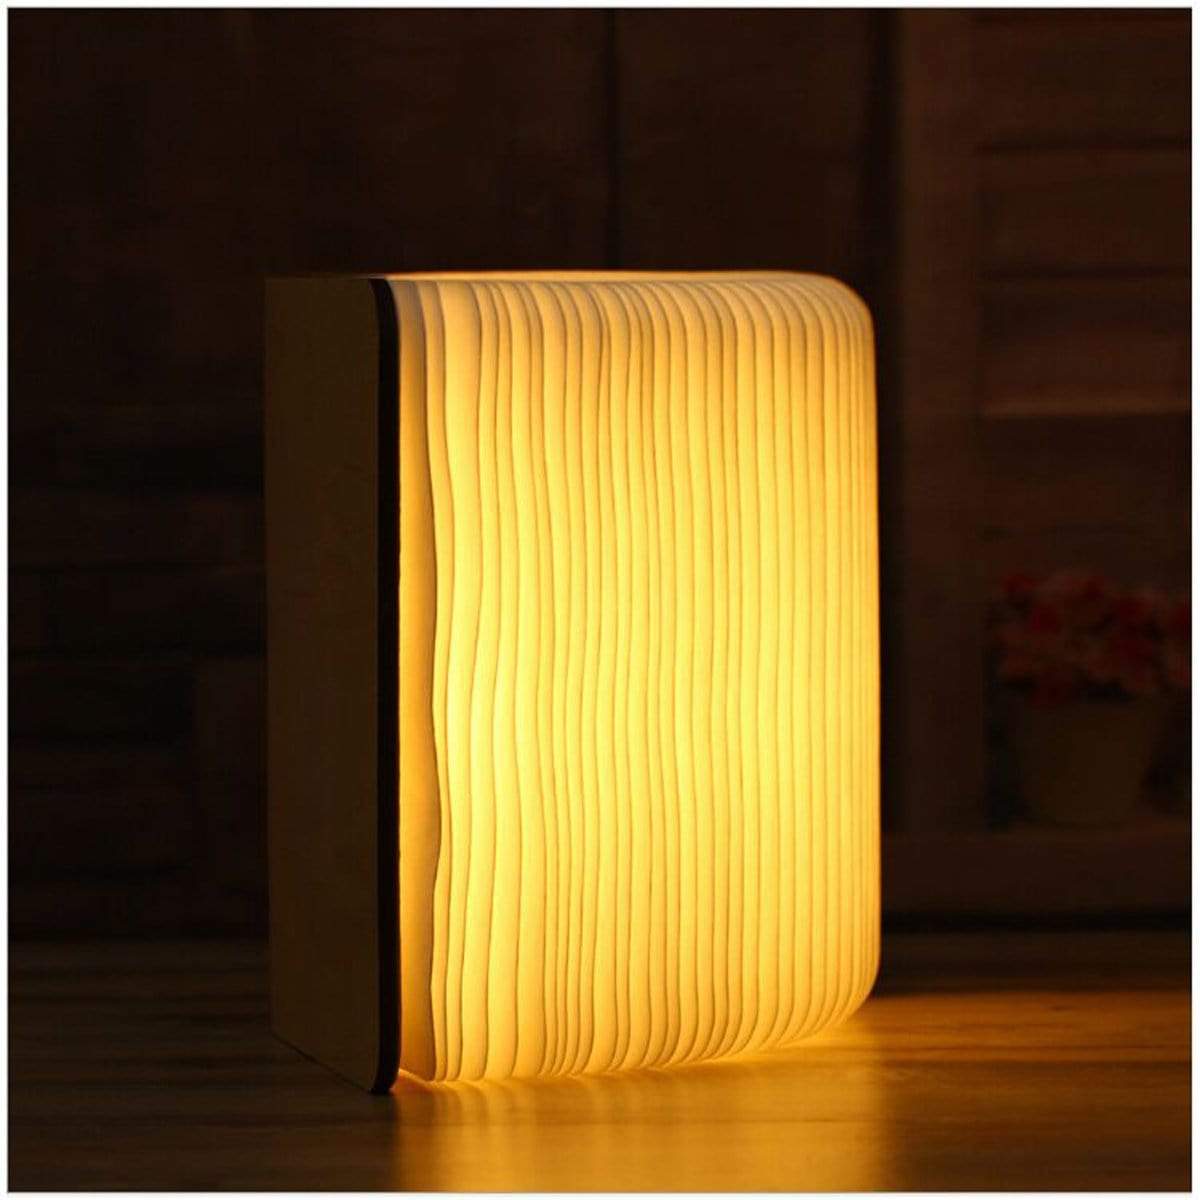 Book Lamp Grandma To Grandson - The Best Thing LED Folding Book Light GiveMe-Gifts